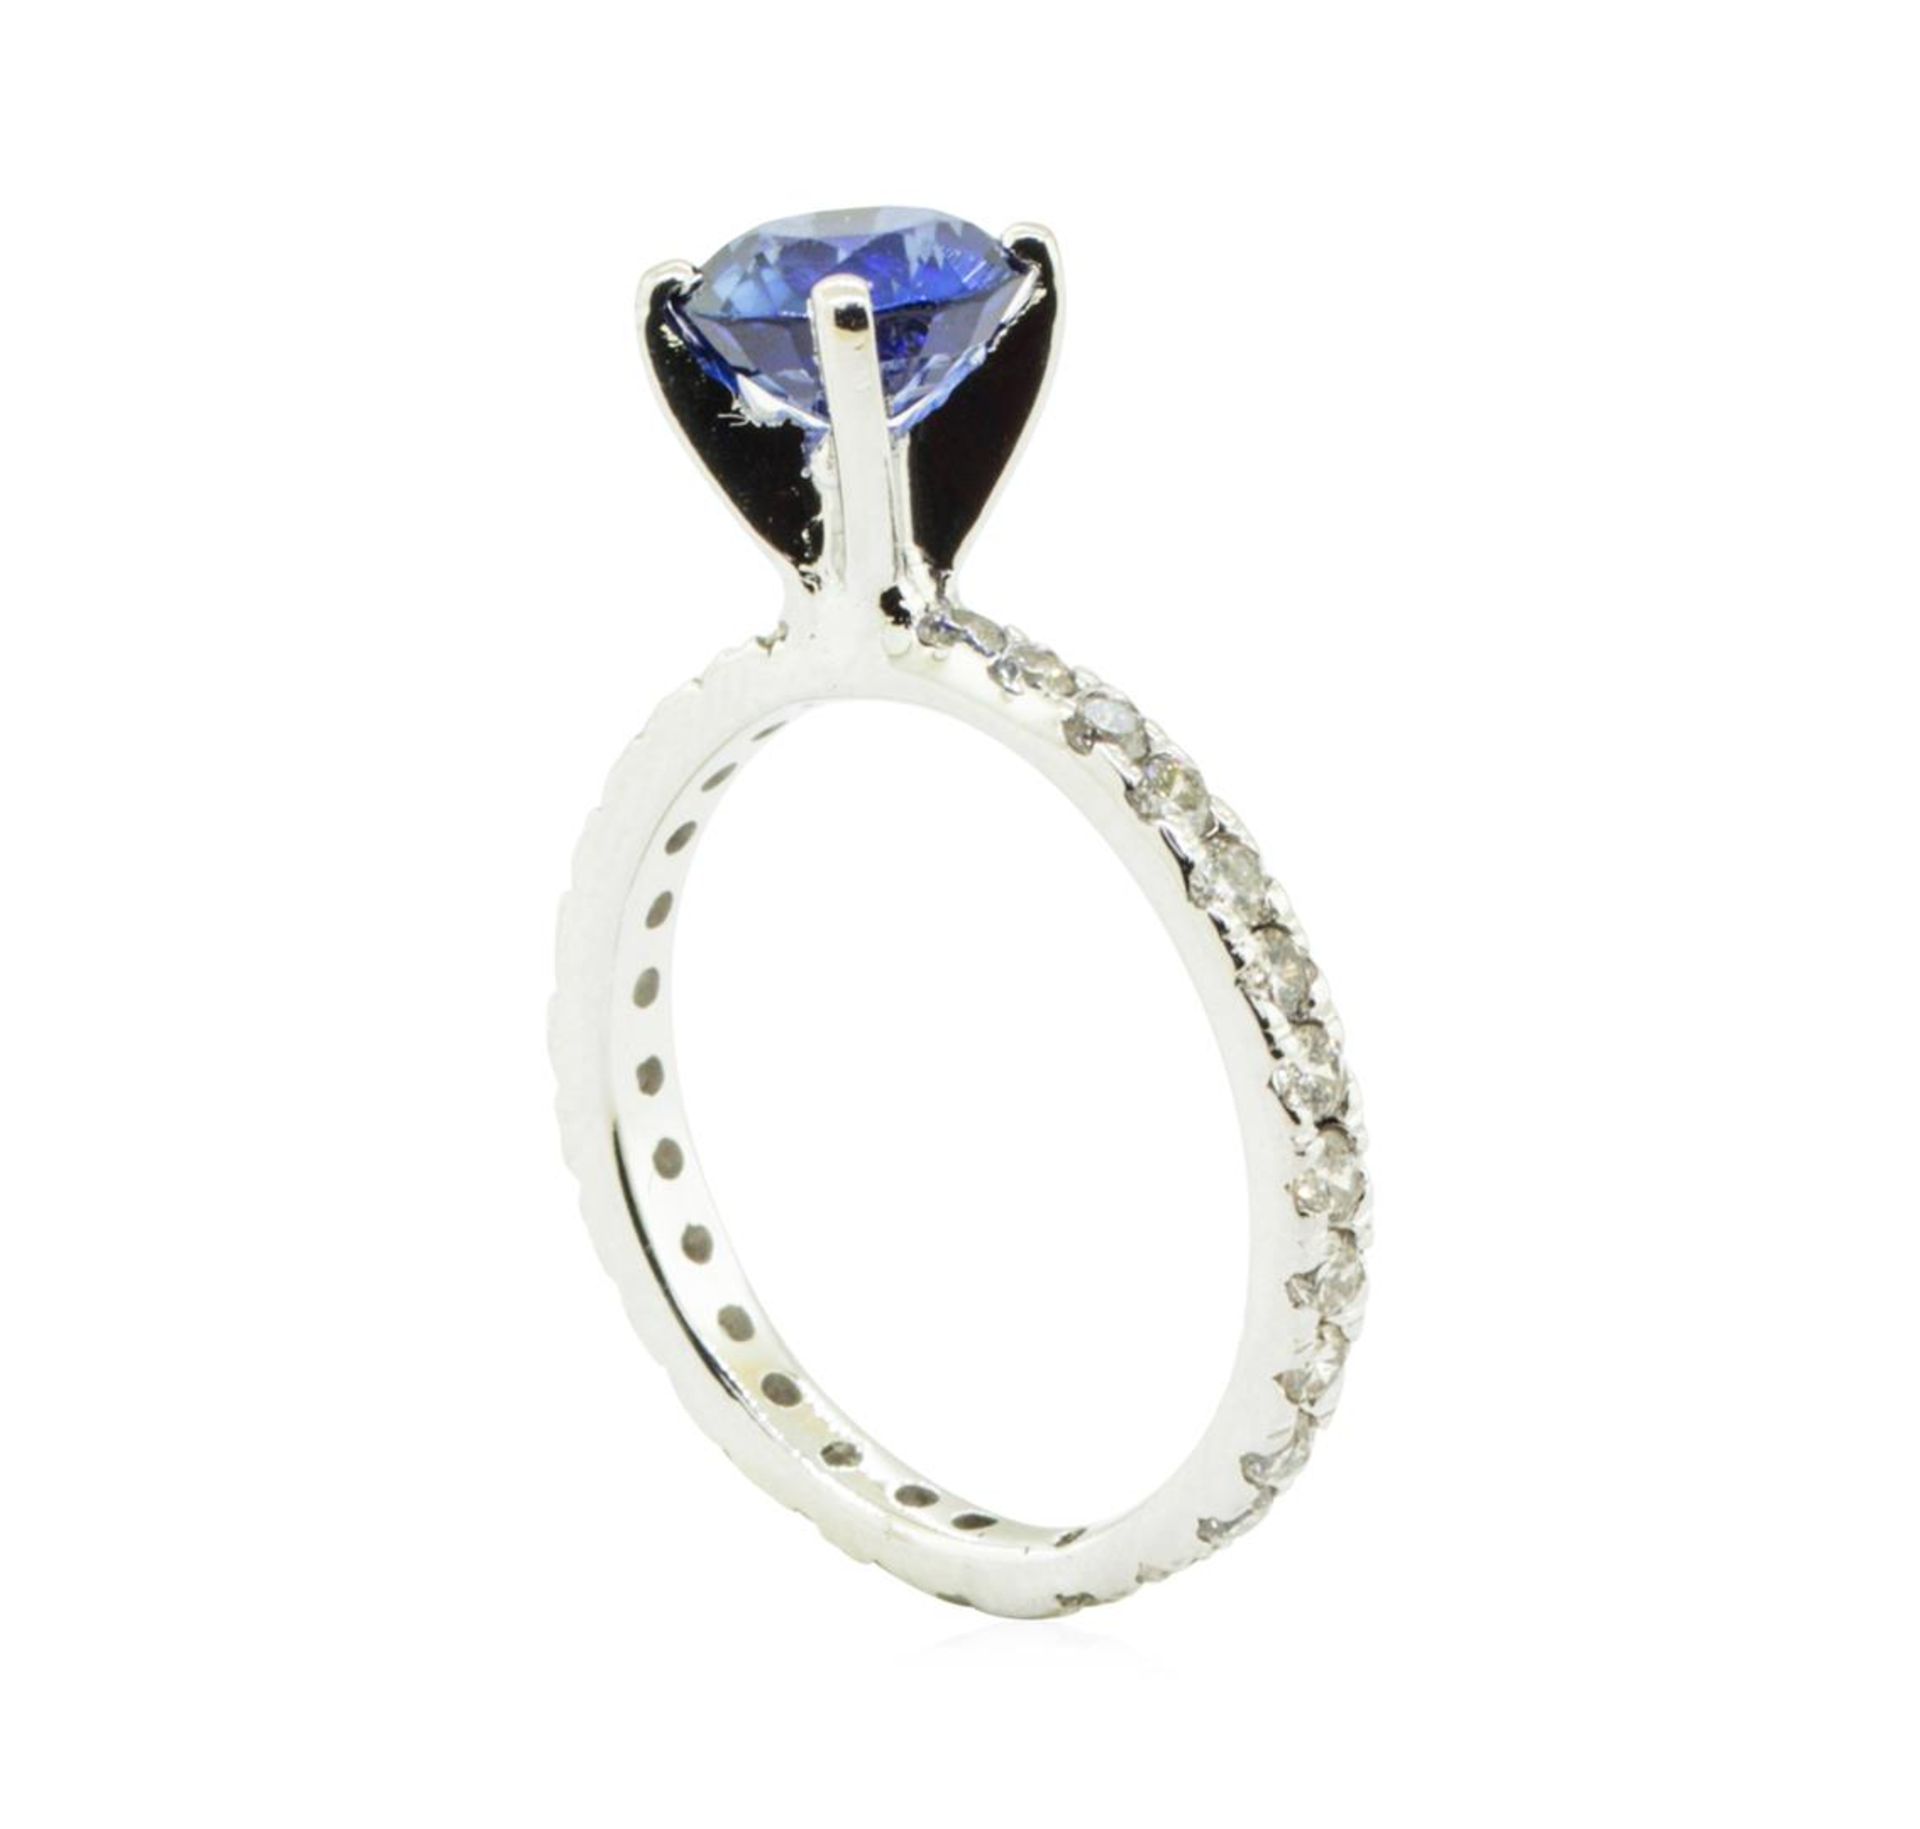 1.91 ctw Blue Sapphire and Diamond Ring - 14KT White Gold - Image 4 of 4